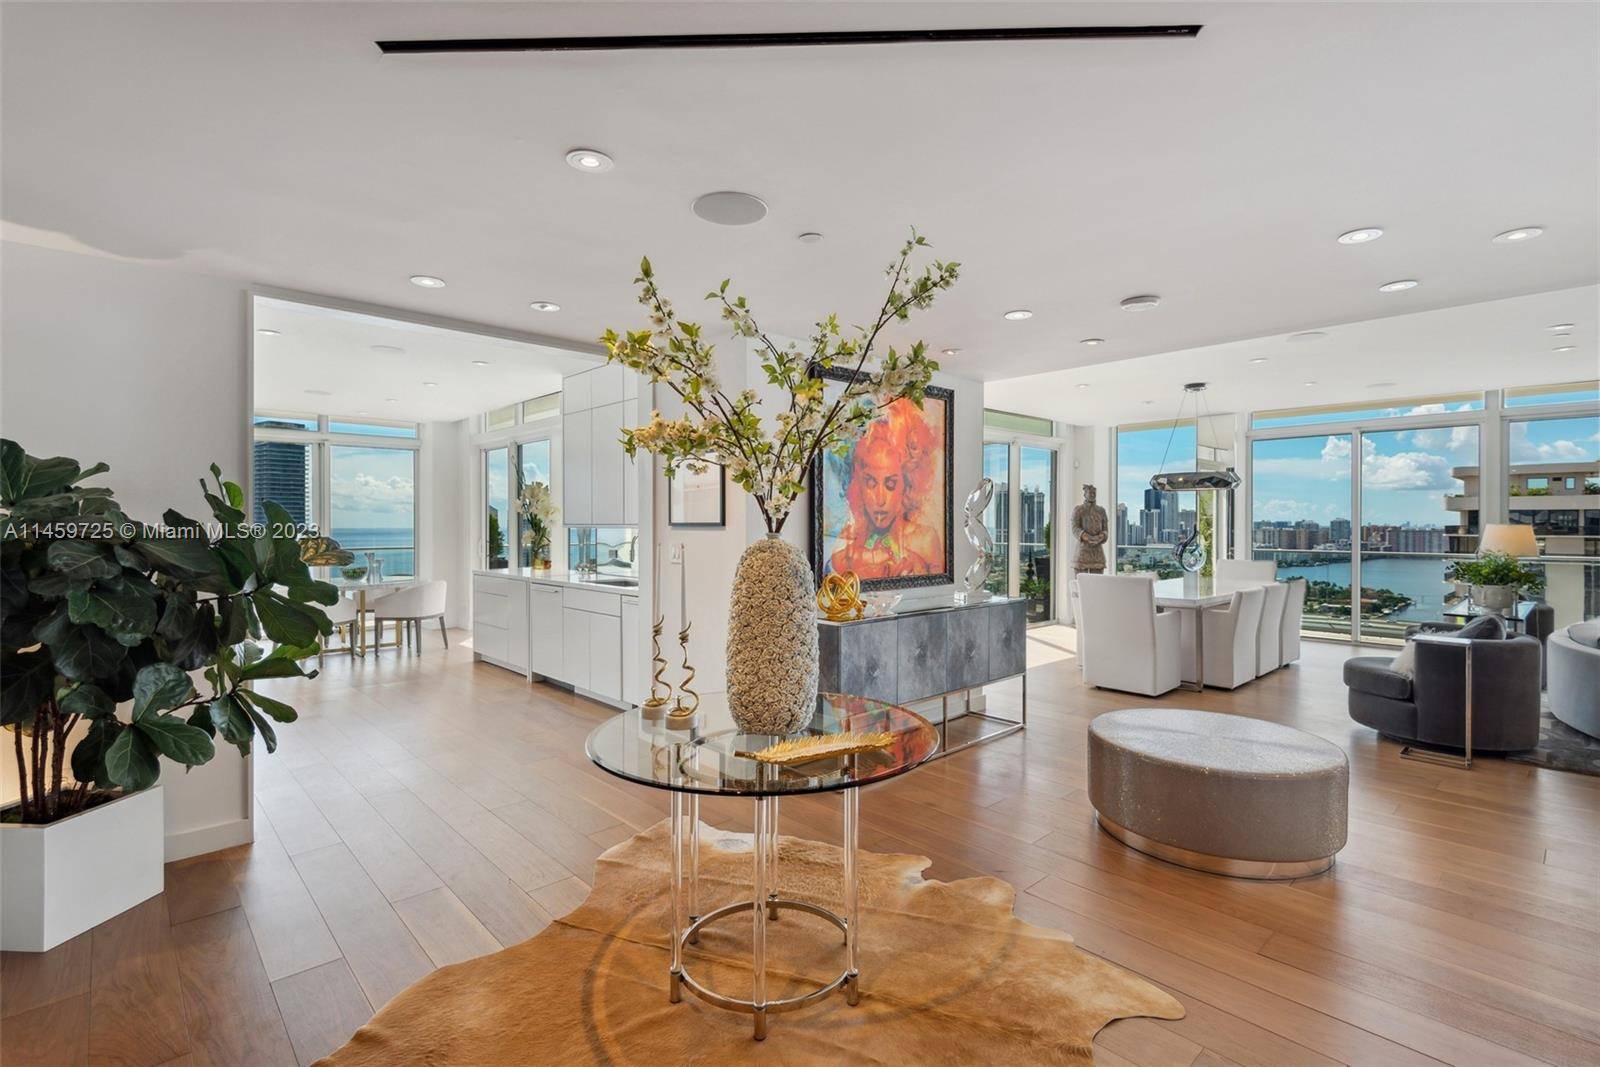 This exquisite penthouse boasts a prime location with unobstructed views of both the ocean and Intracoastal from every room.